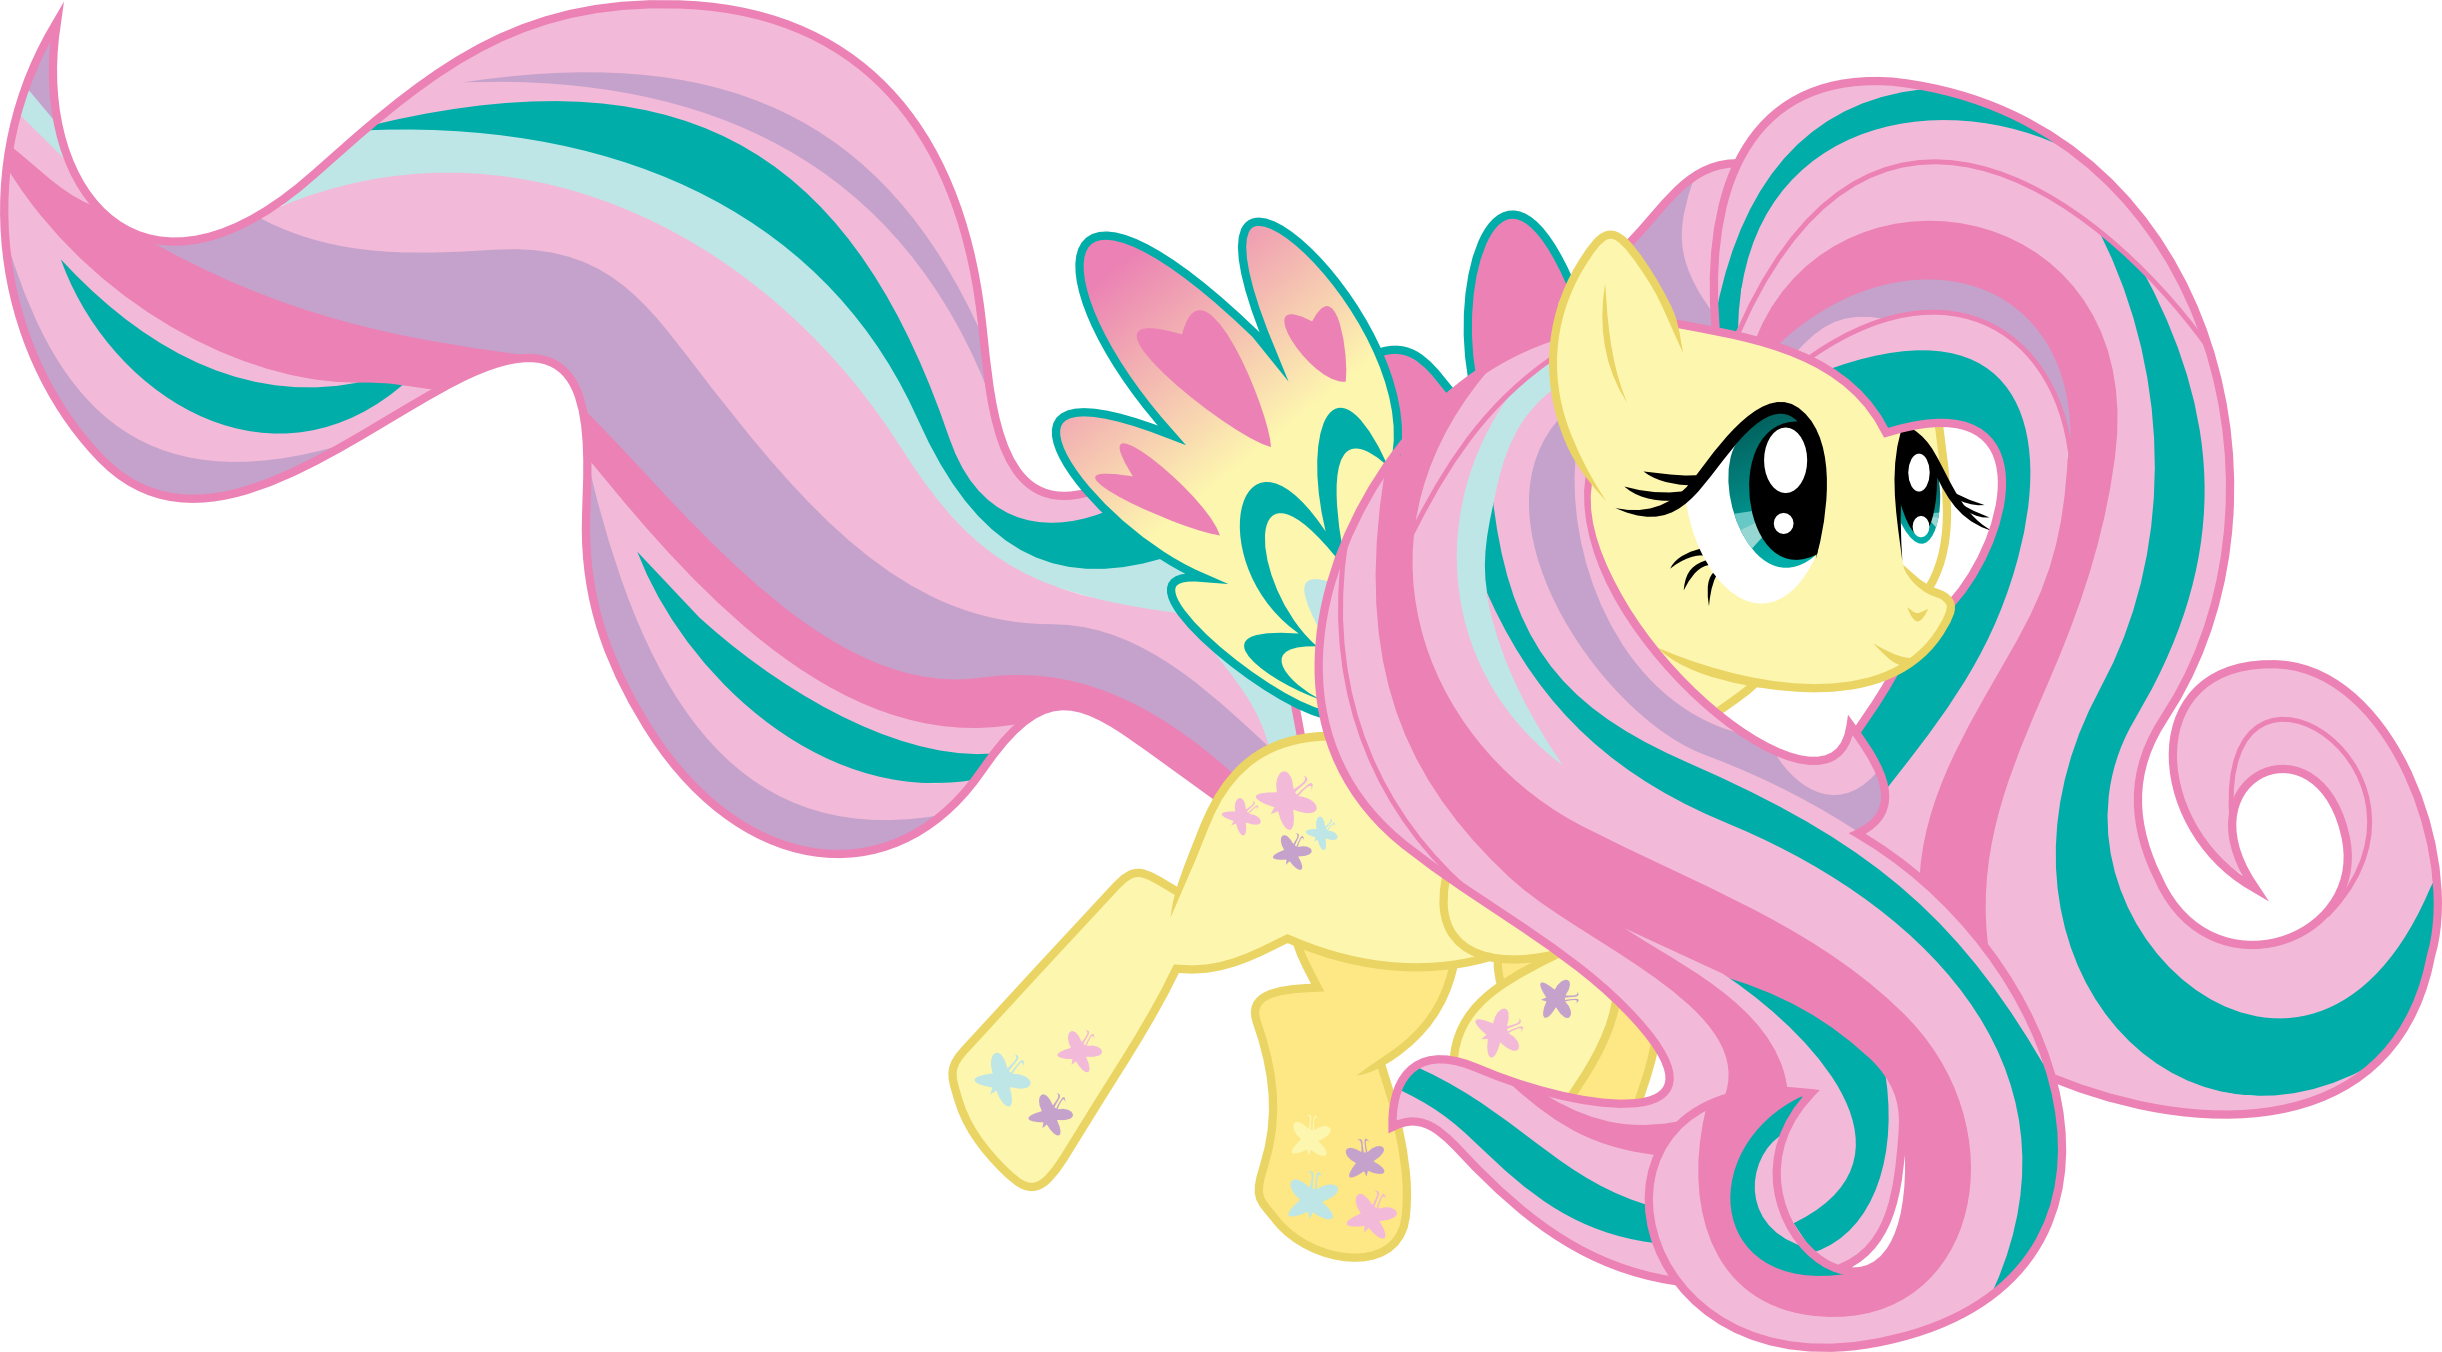 Power fluttershy by whizzball. Palace clipart rainbow